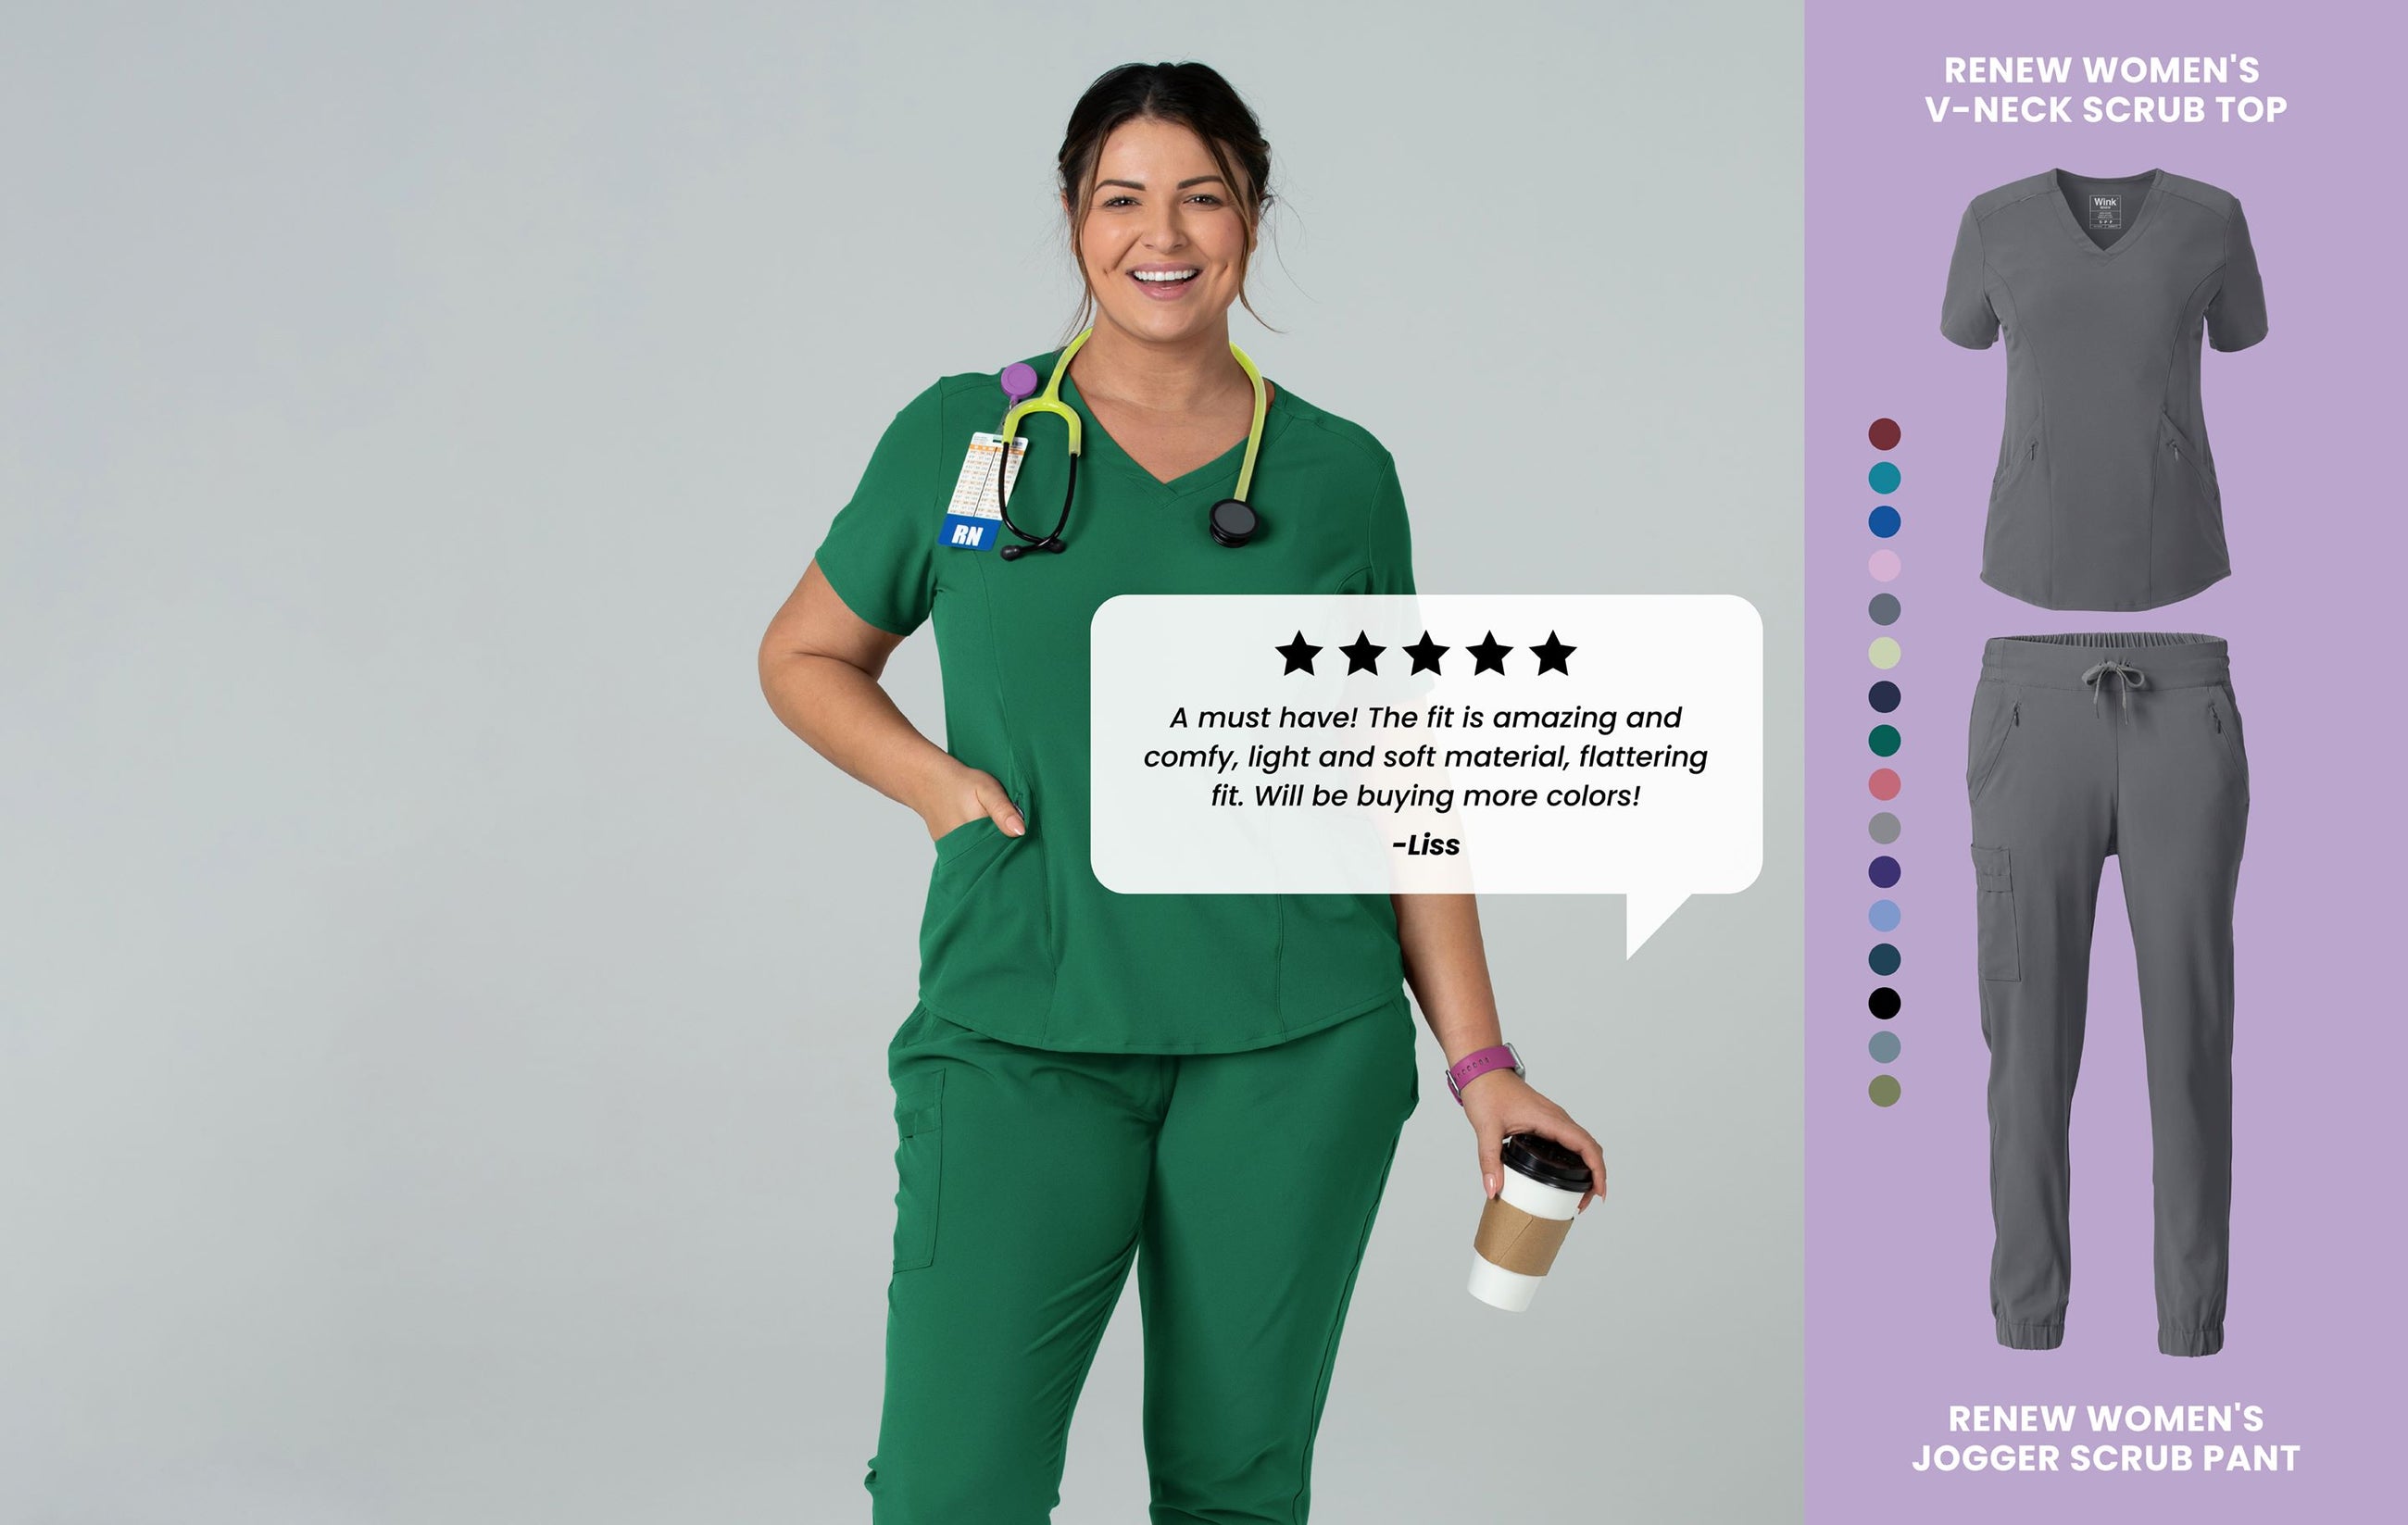 Customer Quote: "A must have! The fit is amazing and comfy, light and soft material, flattering fit. Will be buying more colors!"-Liss; Renew Women's V-Neck Scrub Top; Renew Women's Jogger Scrub Pant - Wink Renew Women's best selling scrubs